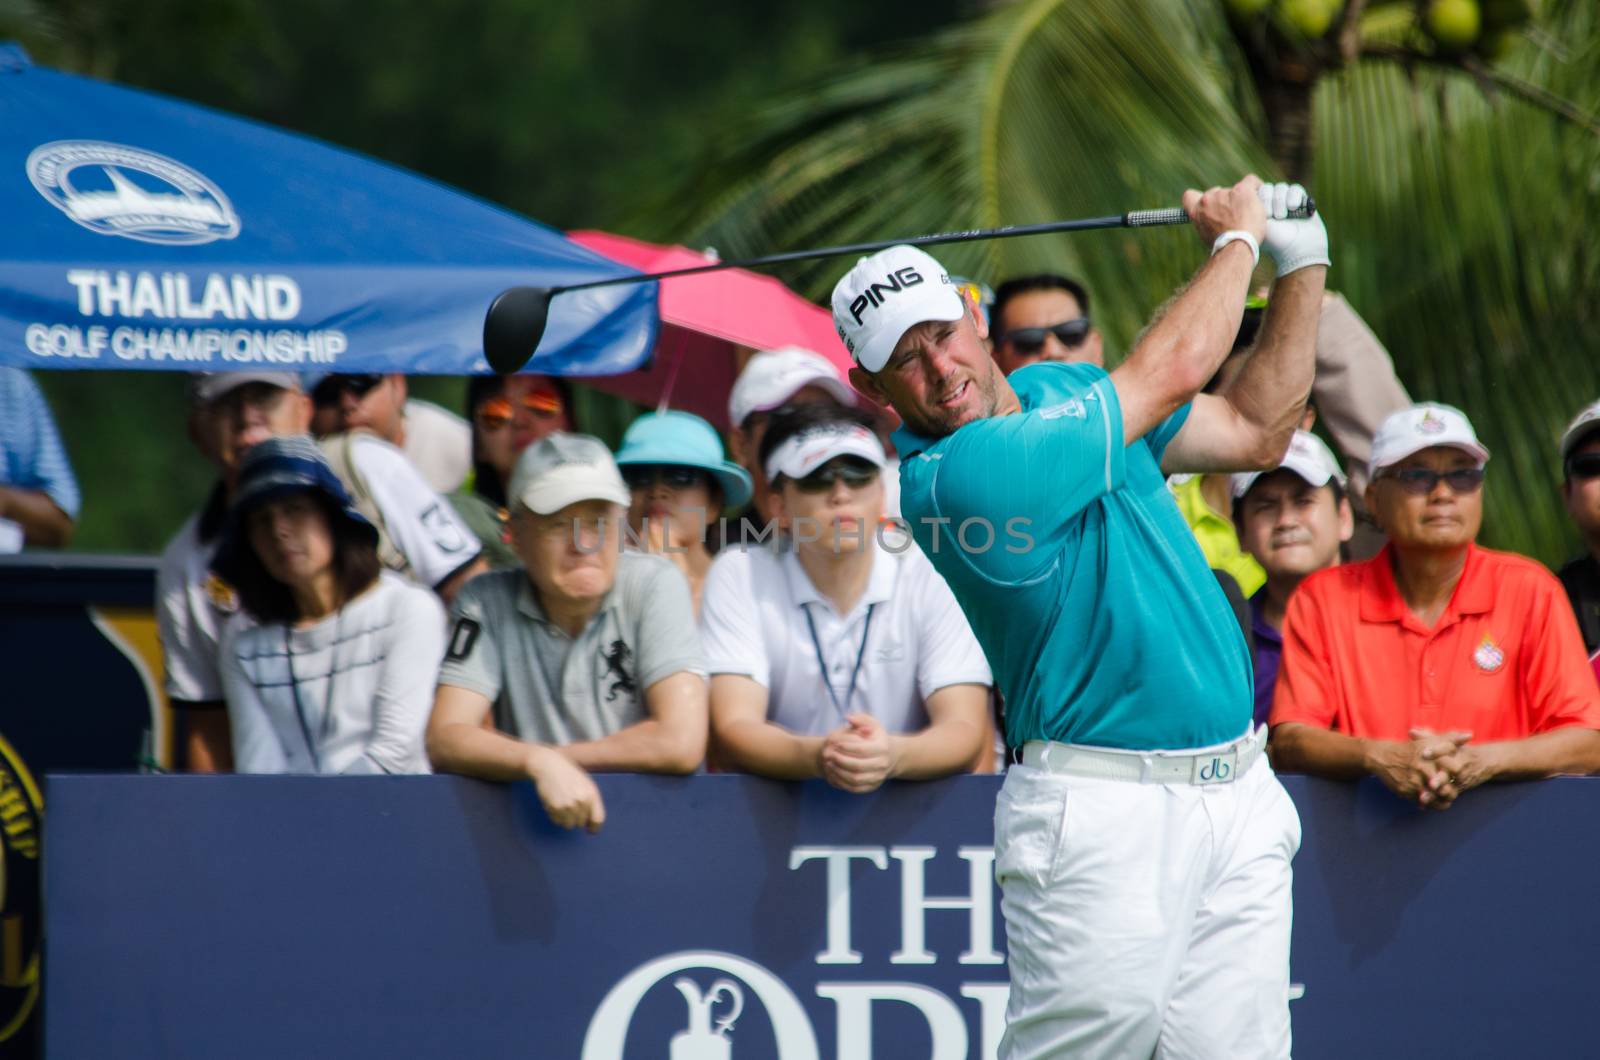 Lee Westwood in Thailand Golf Championship 2015 by chatchai